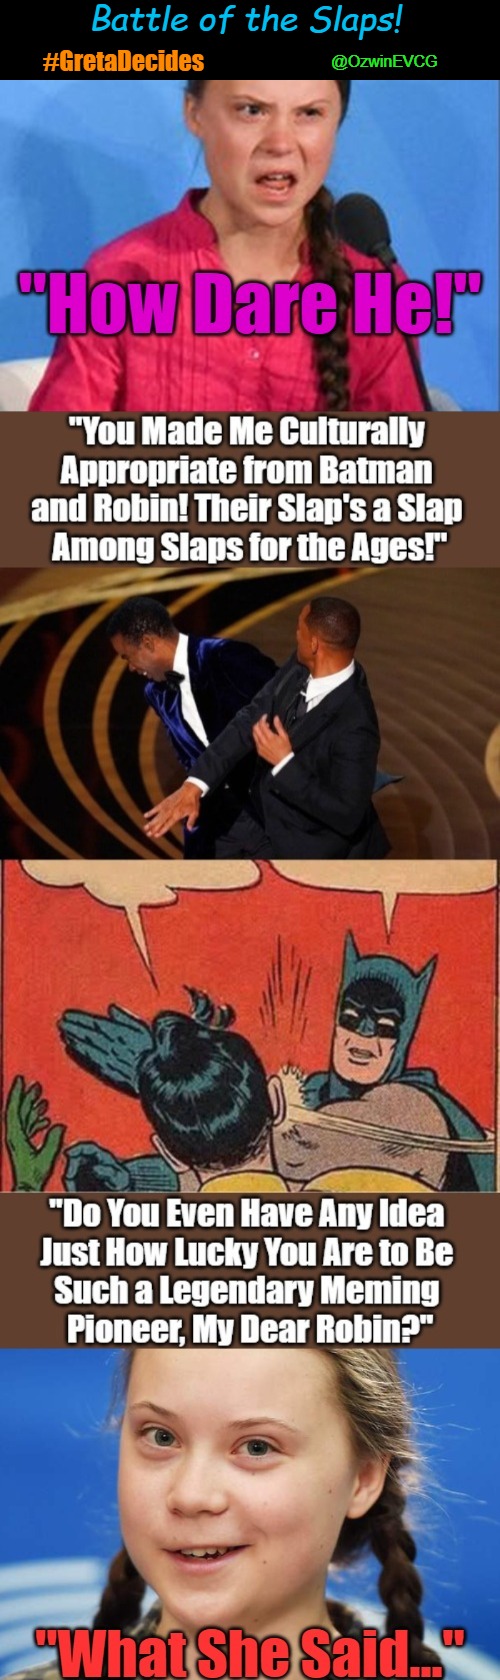 Battle of the Slaps! [-With- Greta's Supervision!] #GretaDecides | Battle of the Slaps! @OzwinEVCG; #GretaDecides | image tagged in batman slapping robin,trending memes,cultural appropriation,trending hashtags,will smith slaps chris rock,how dare you | made w/ Imgflip meme maker